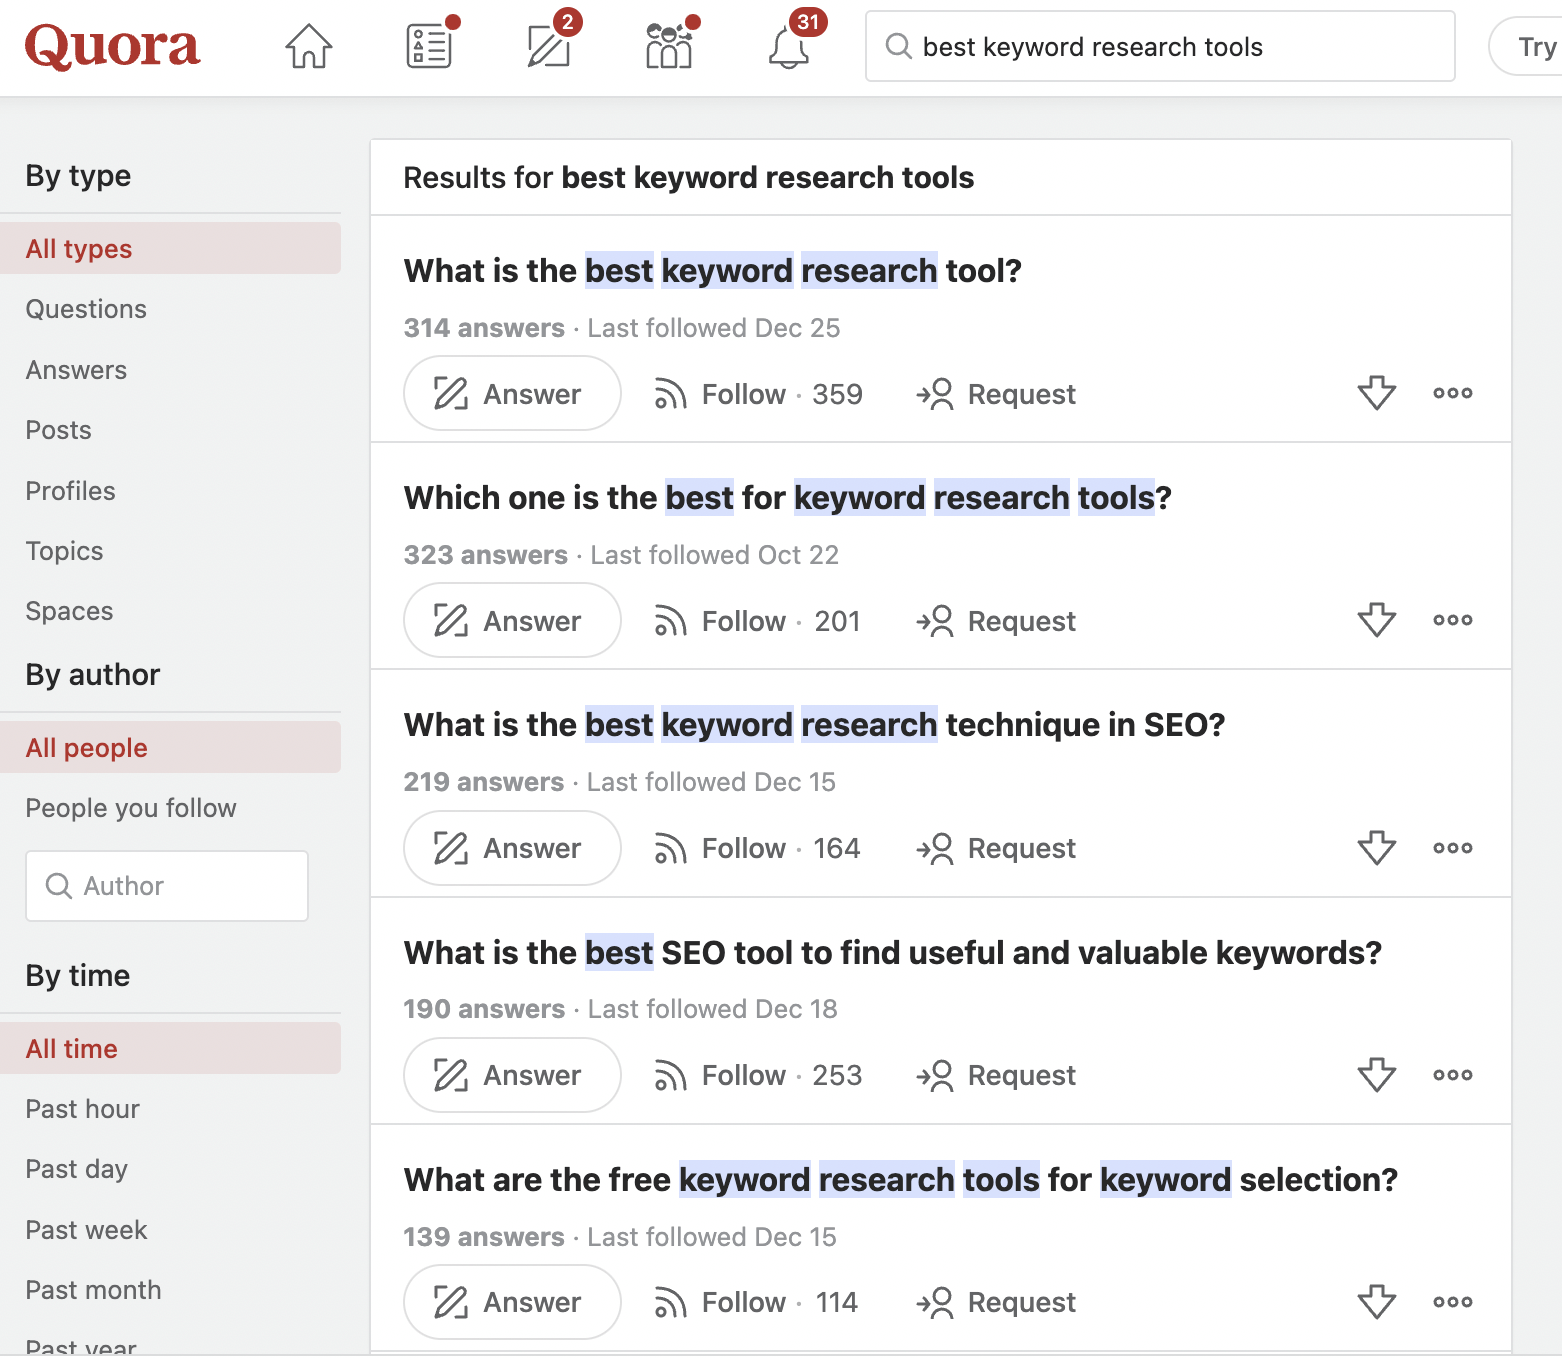 using Quora for searching best keyword research tools